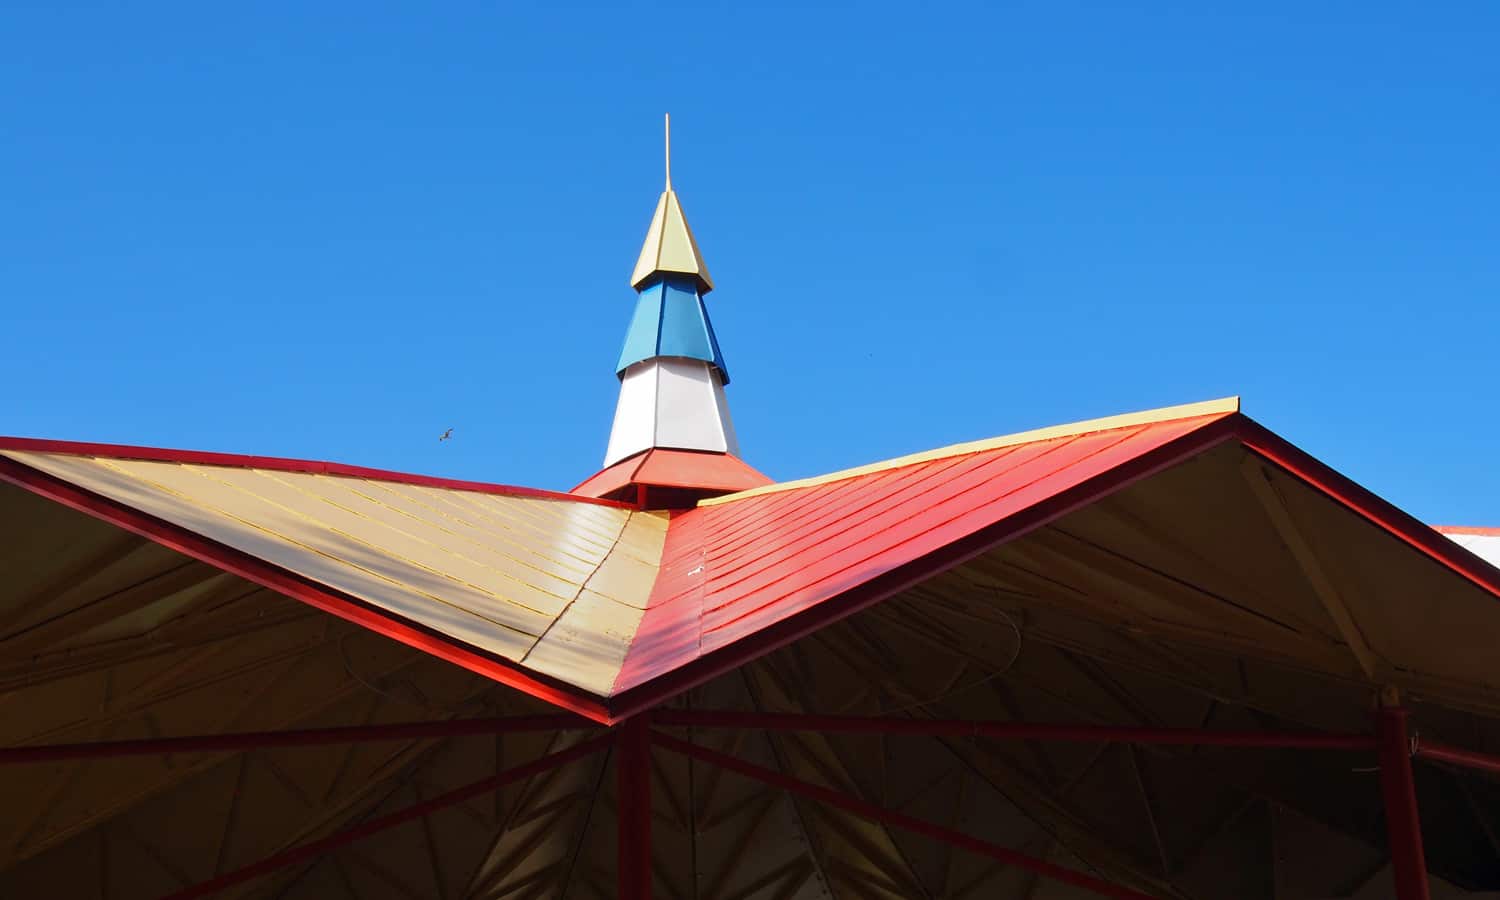 Detail of the pavilion roof top with its festive colours